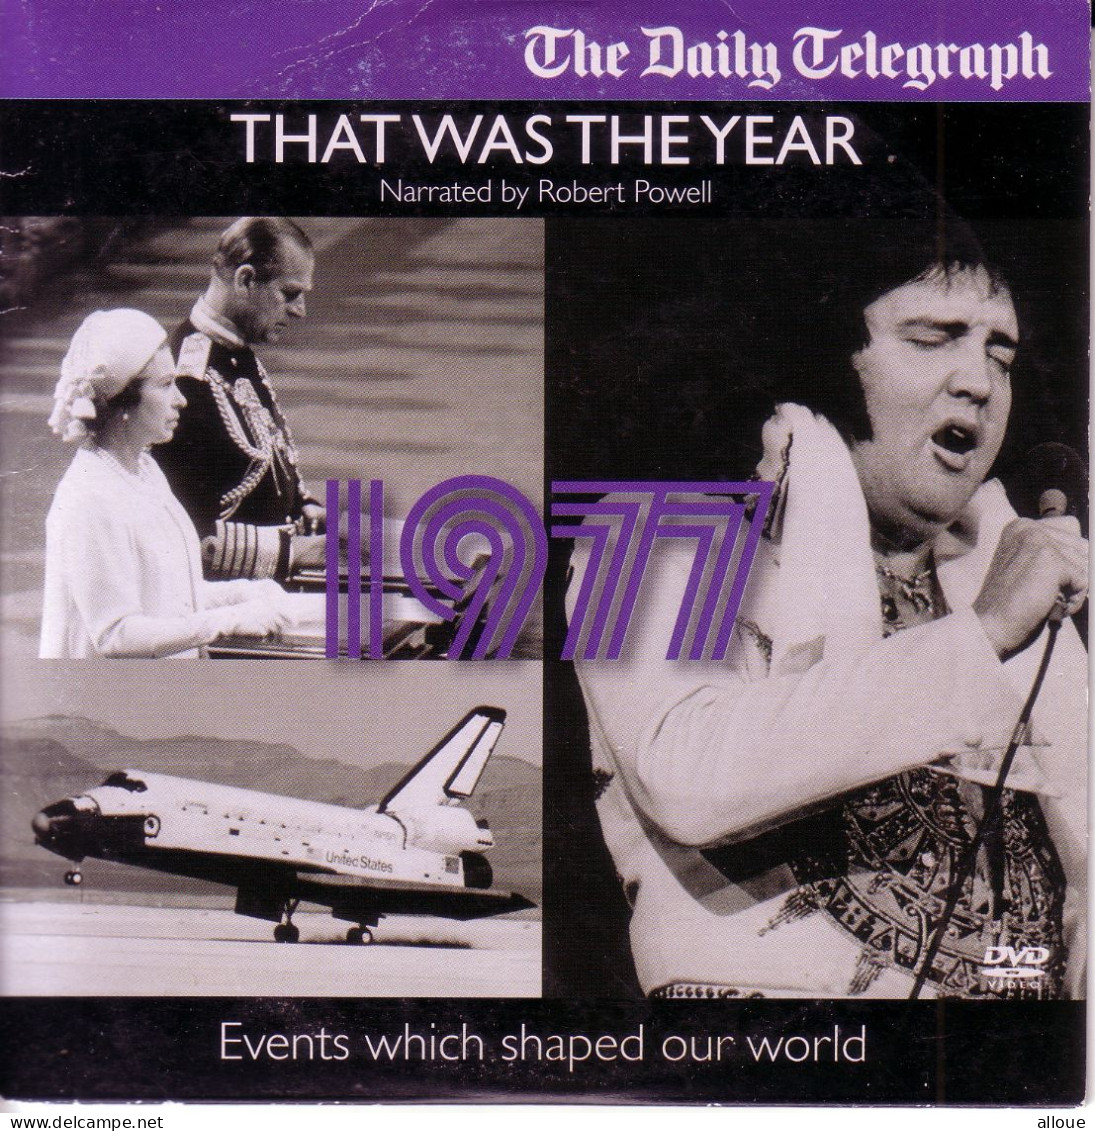 THAT WAS THE YEAR 1977 - CD DAILY TELEGRAPH - POCHETTE CARTON - THE QUEEN CELEBRATES HER SILVER JUBILEE - THE KING ELVIS - DVD Musicali